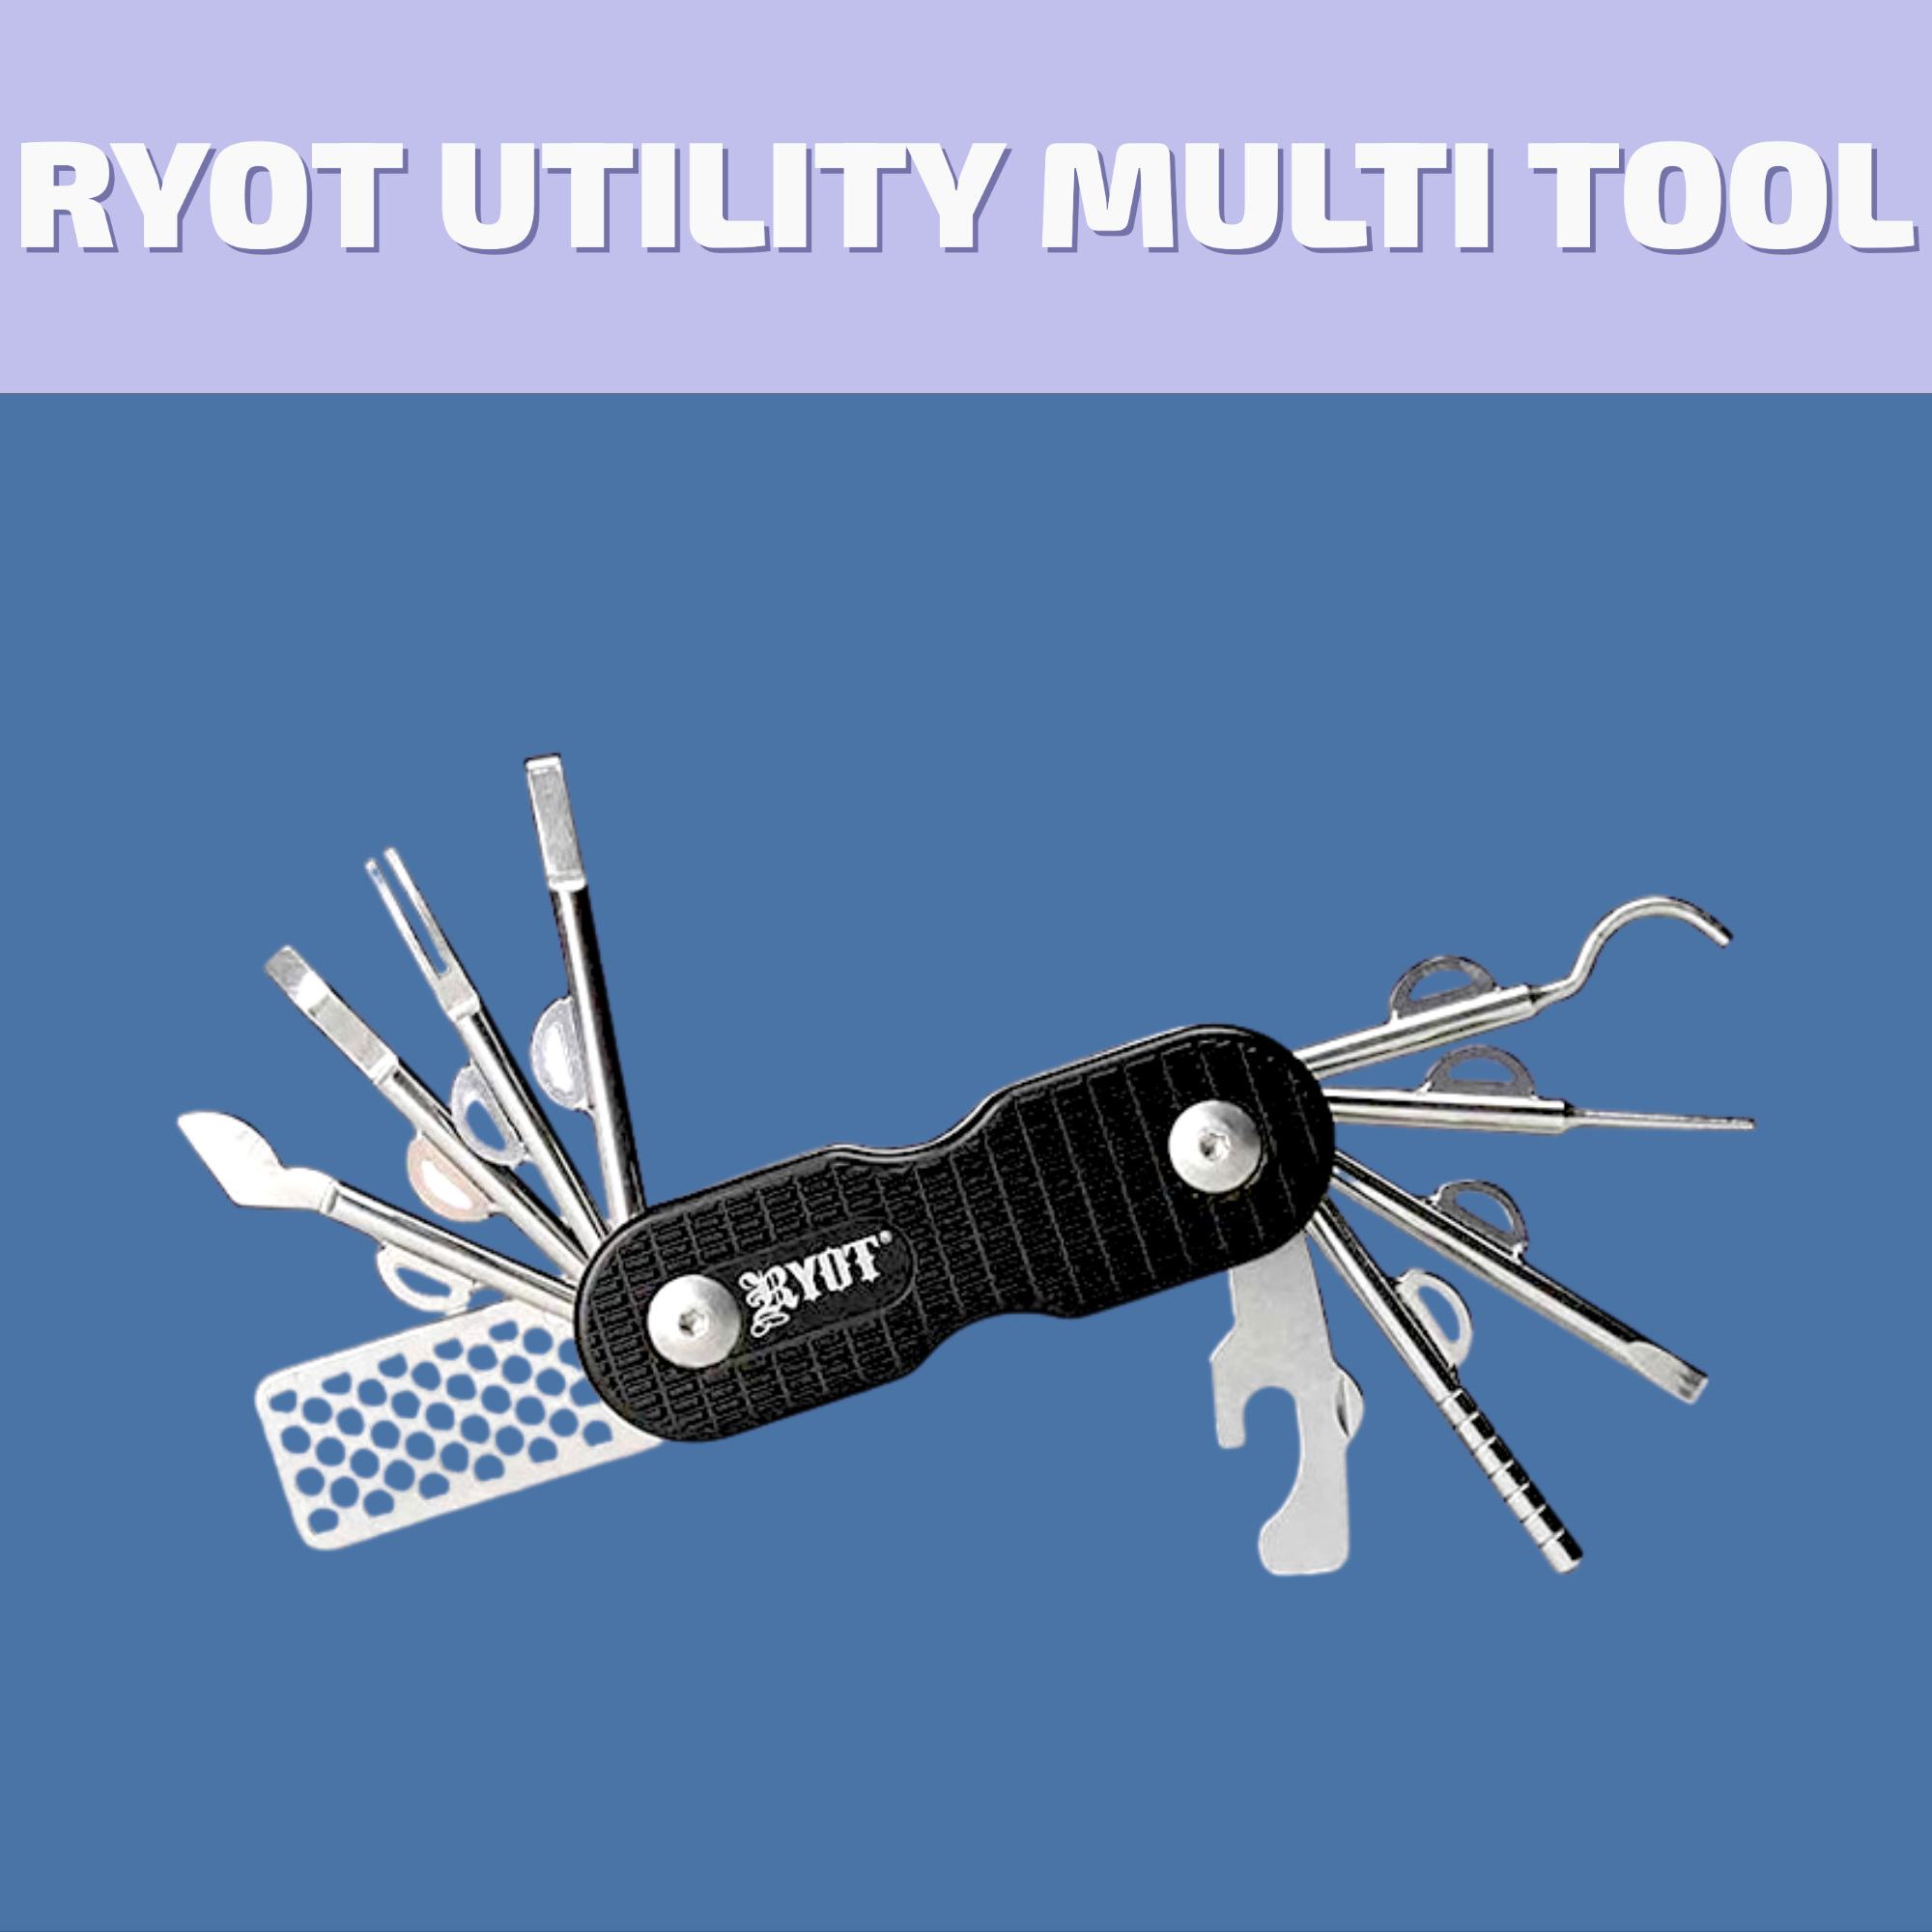 Buy Ryot Utility Multi Tool and bong cleaners for same day delivery or visit the best cannabis store on 580 Academy Road.   